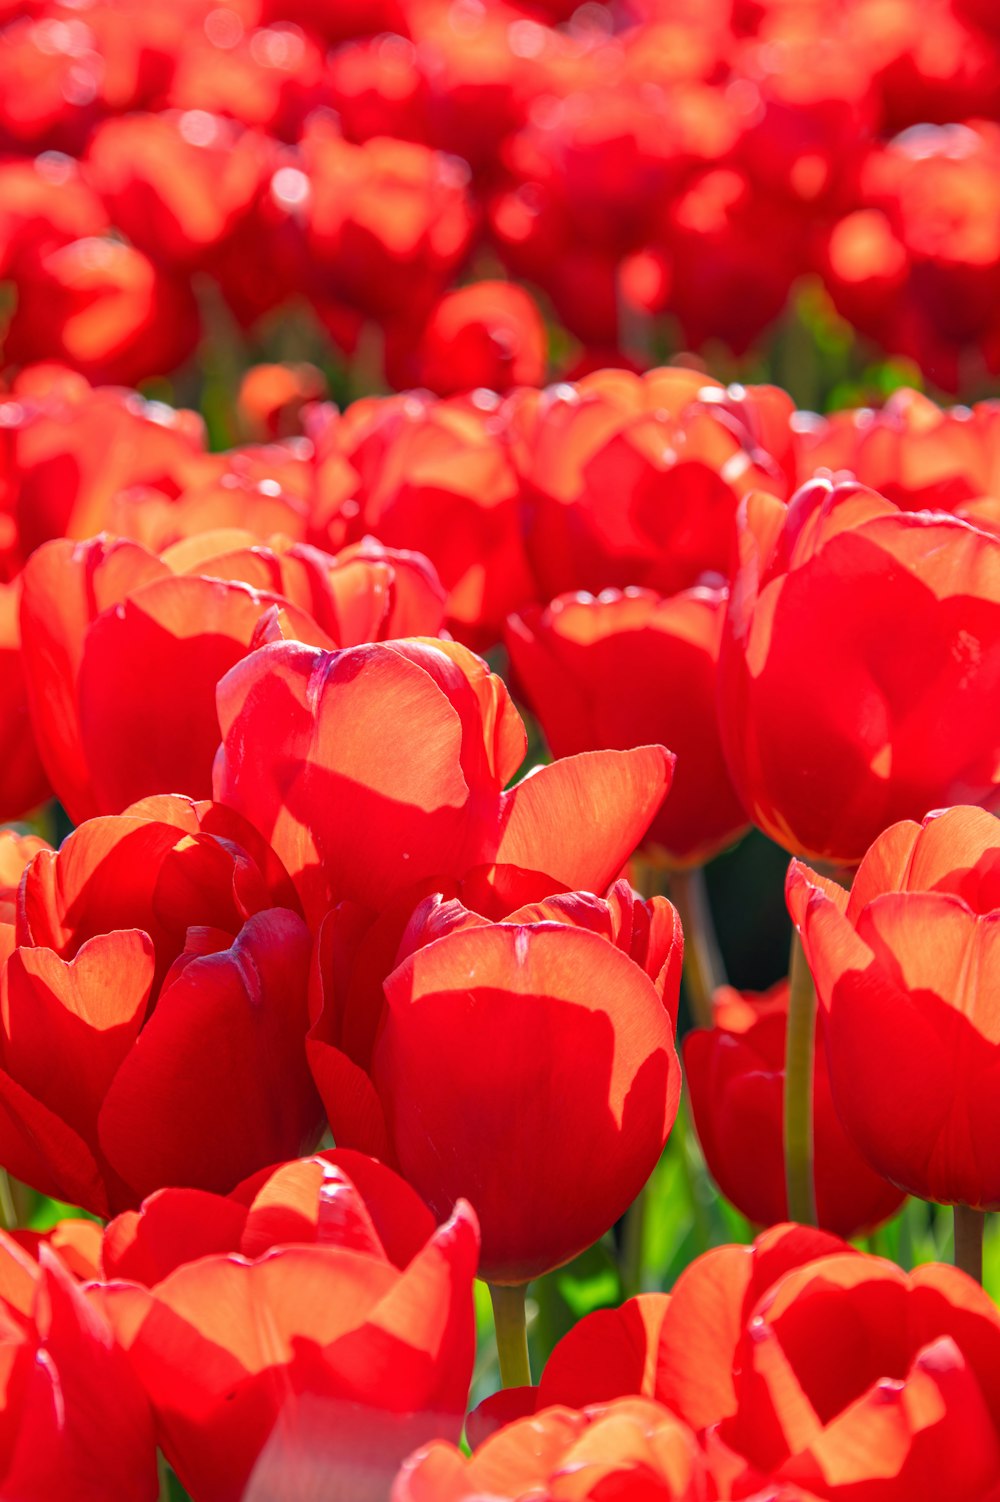 a field of red tulips with green stems